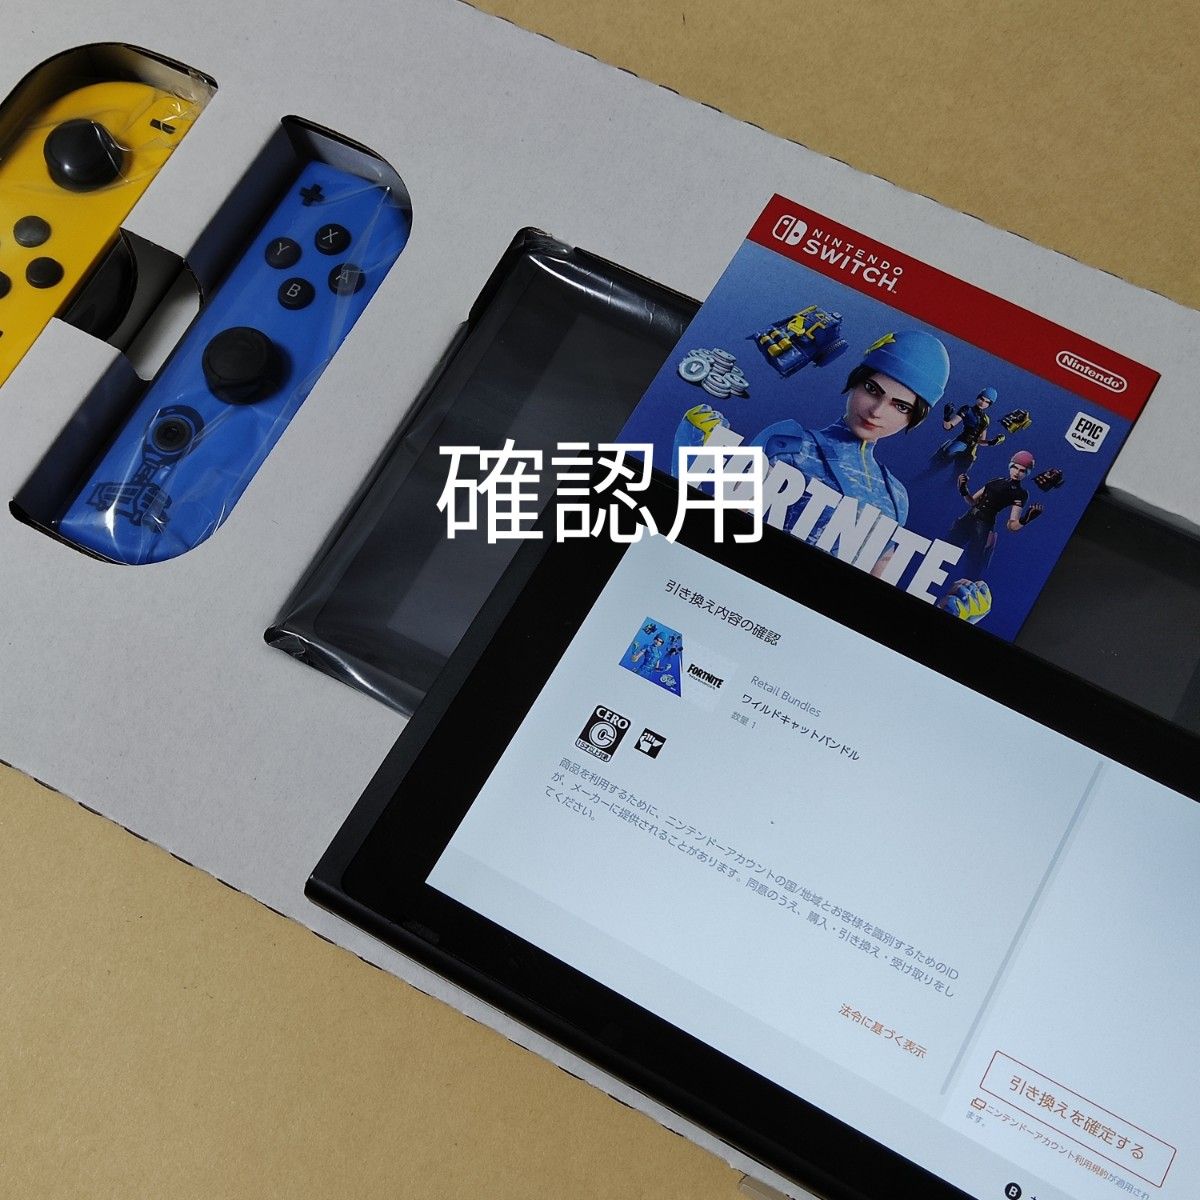 Nintendo Switch 本体 フォートナイトSpecialセット｜PayPayフリマ